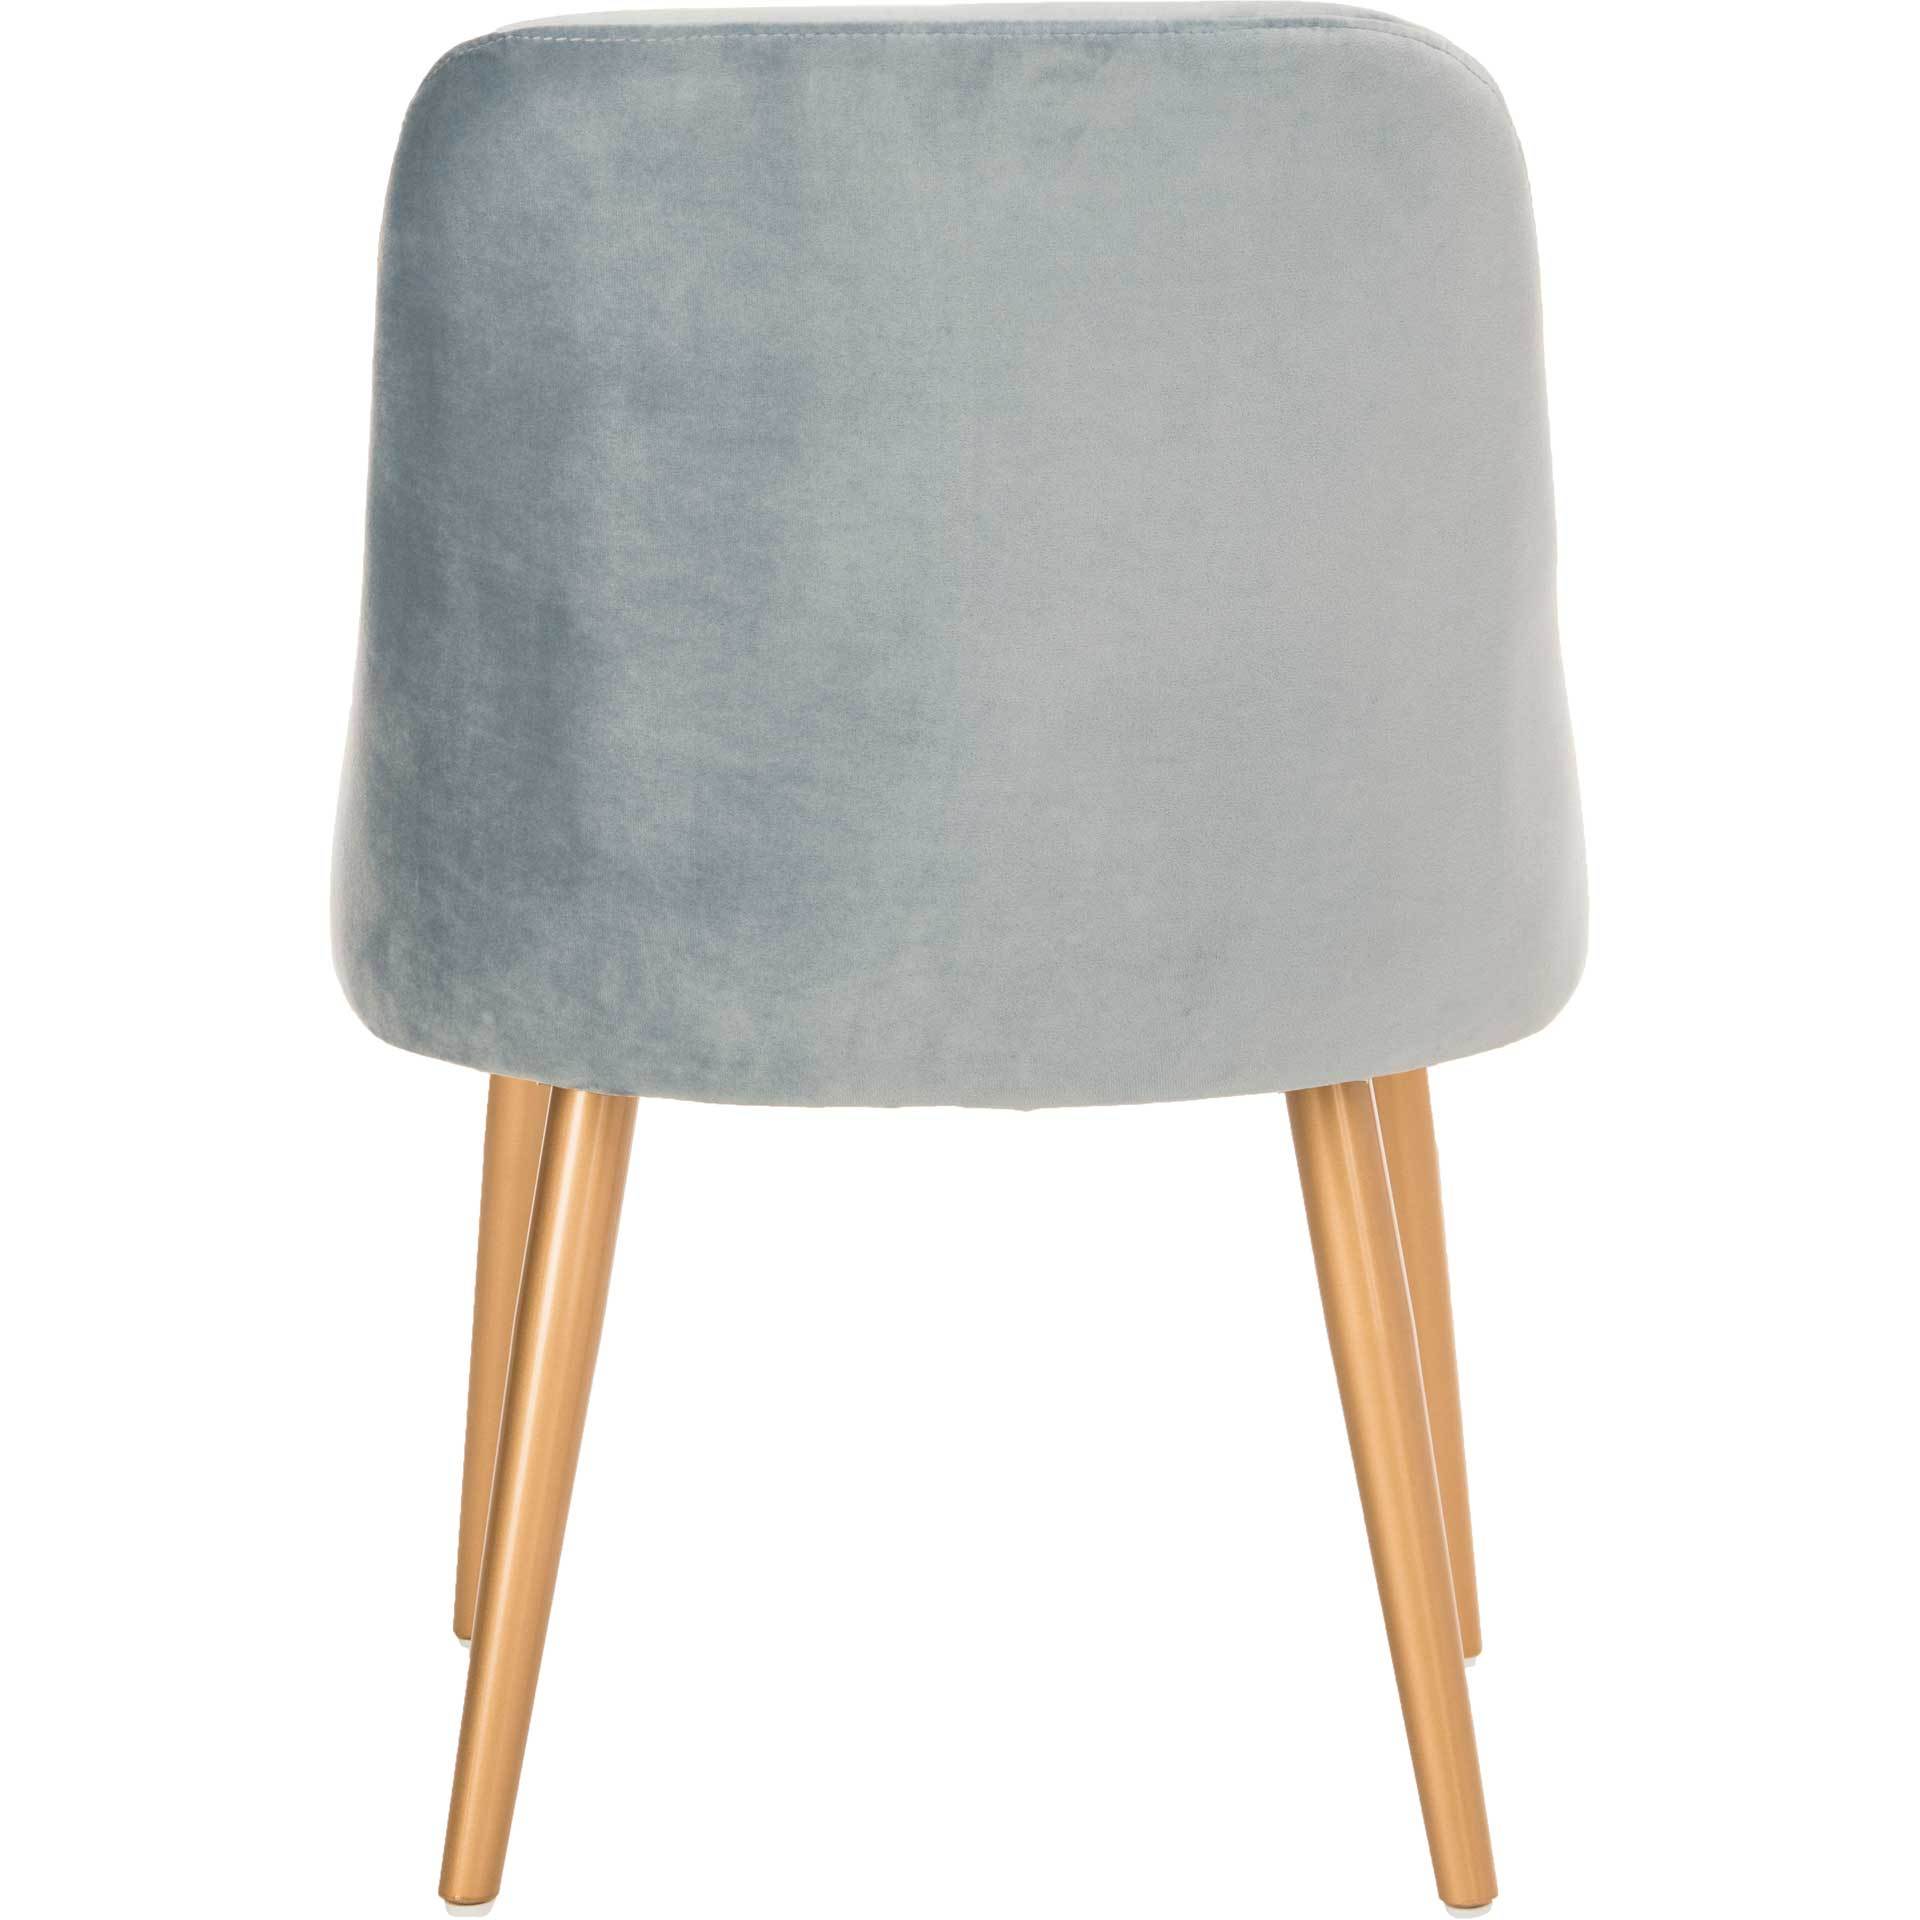 Luis Upholstered Dining Chair Slate Blue/Gold (Set of 2)